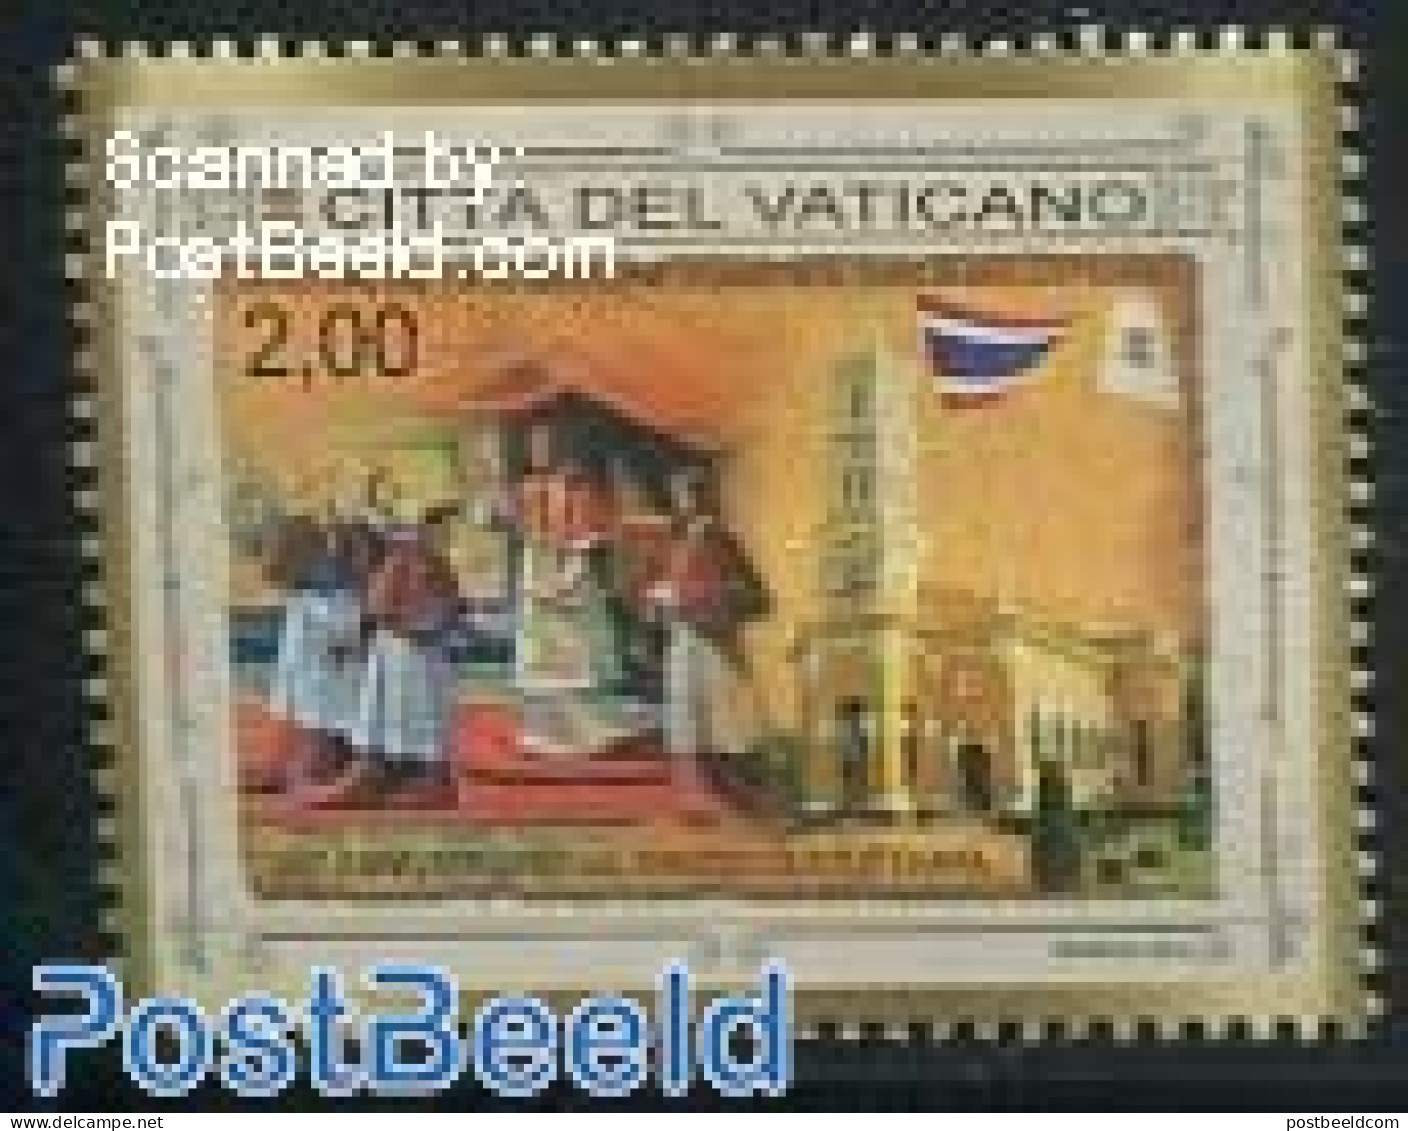 Vatican 2014 Synode Of Ayutthaya 1v, Joint Issue Thailand, Mint NH, Religion - Various - Churches, Temples, Mosques, S.. - Ungebraucht